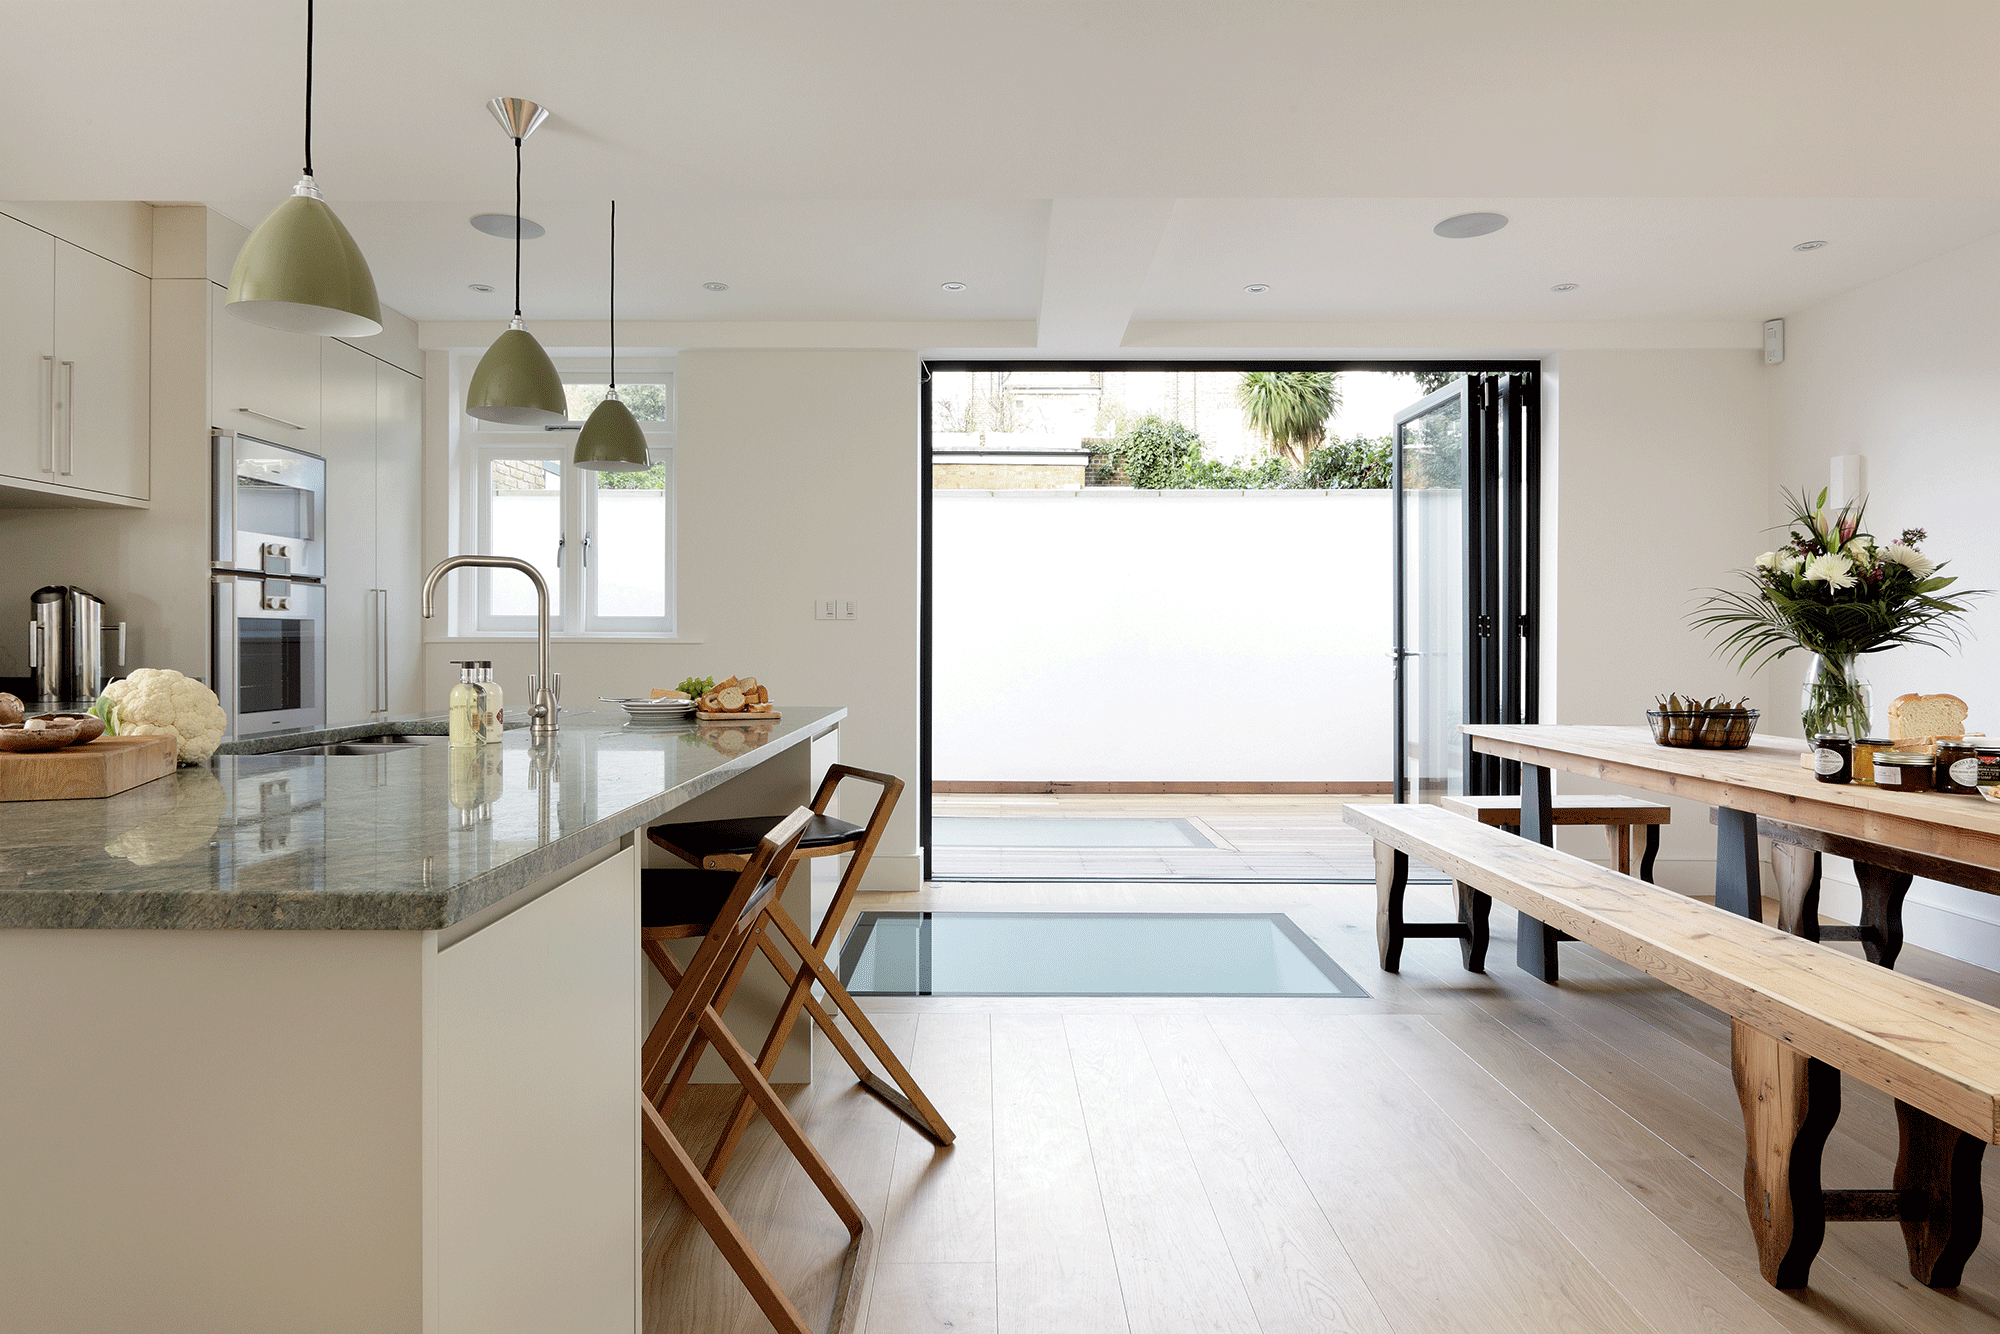 Kitchen by Cue & Co